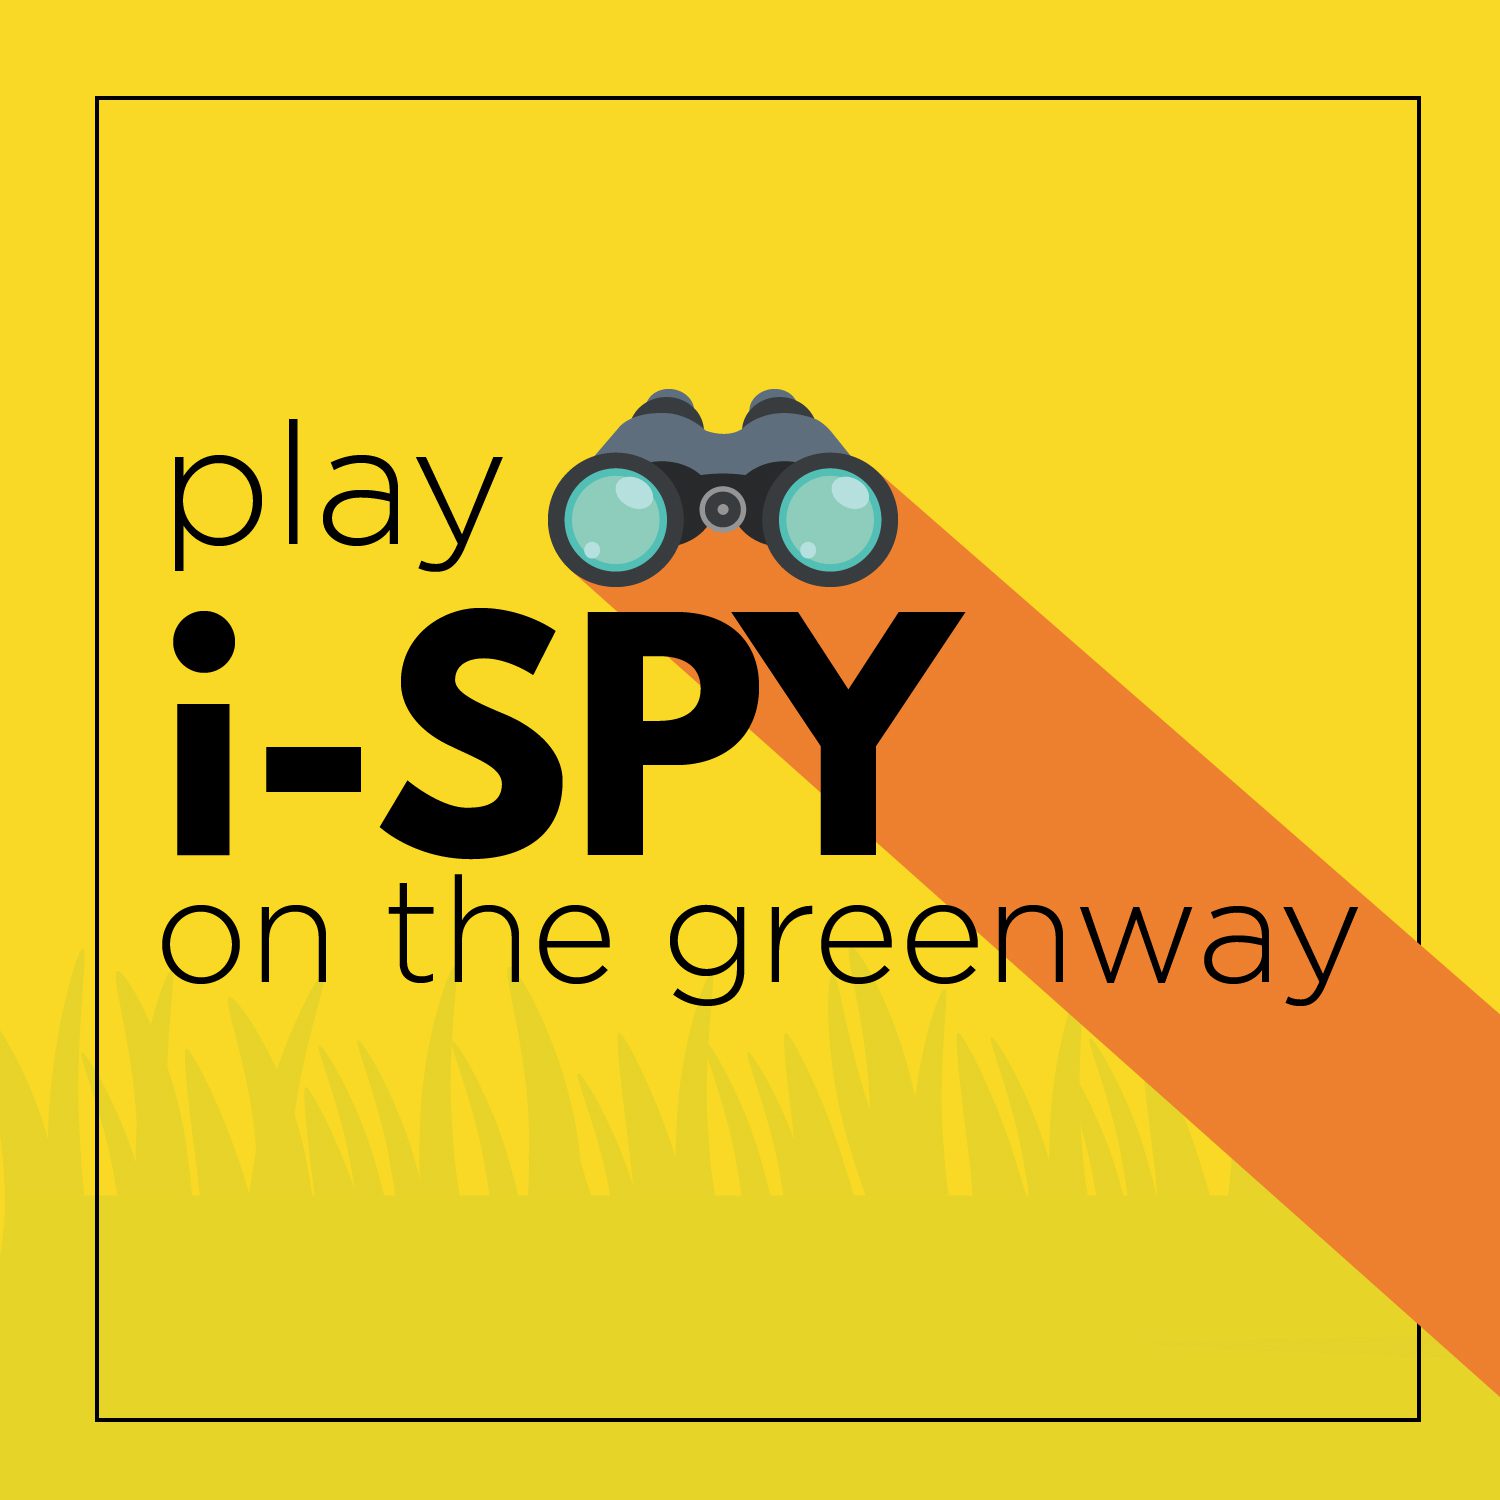 Play I-Spy on the greenway